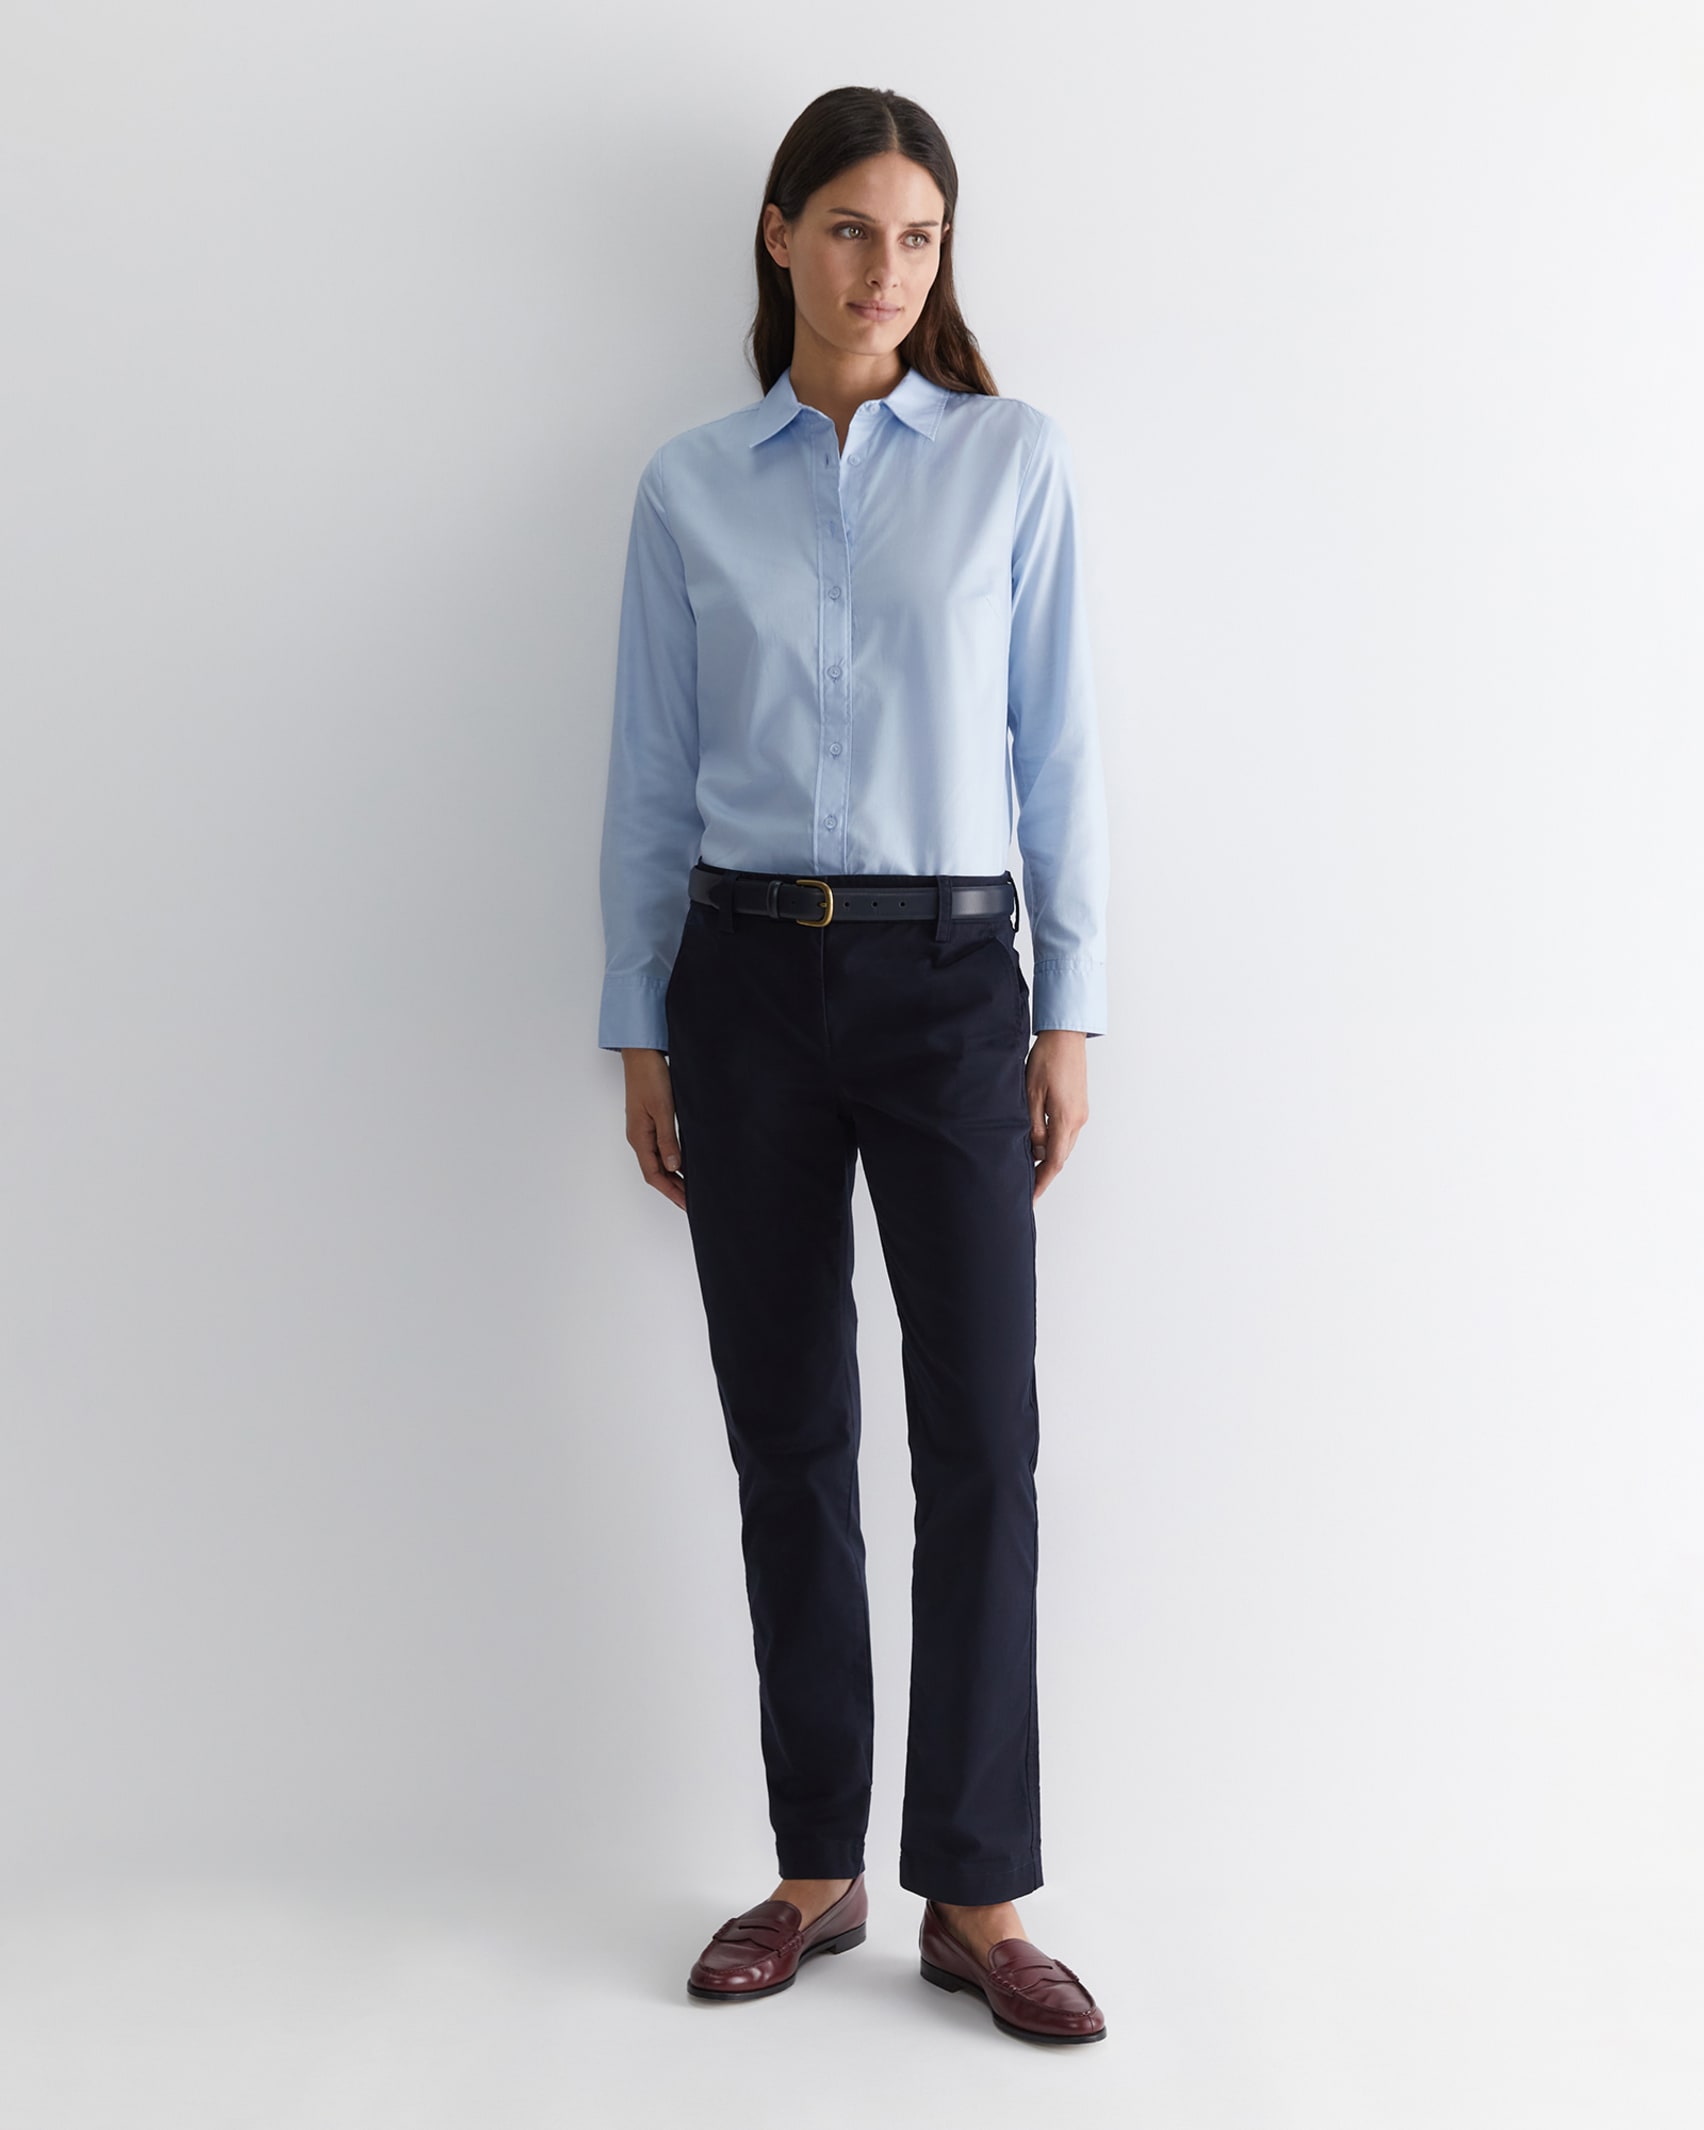 Emily Oxford Shirt in BLUE